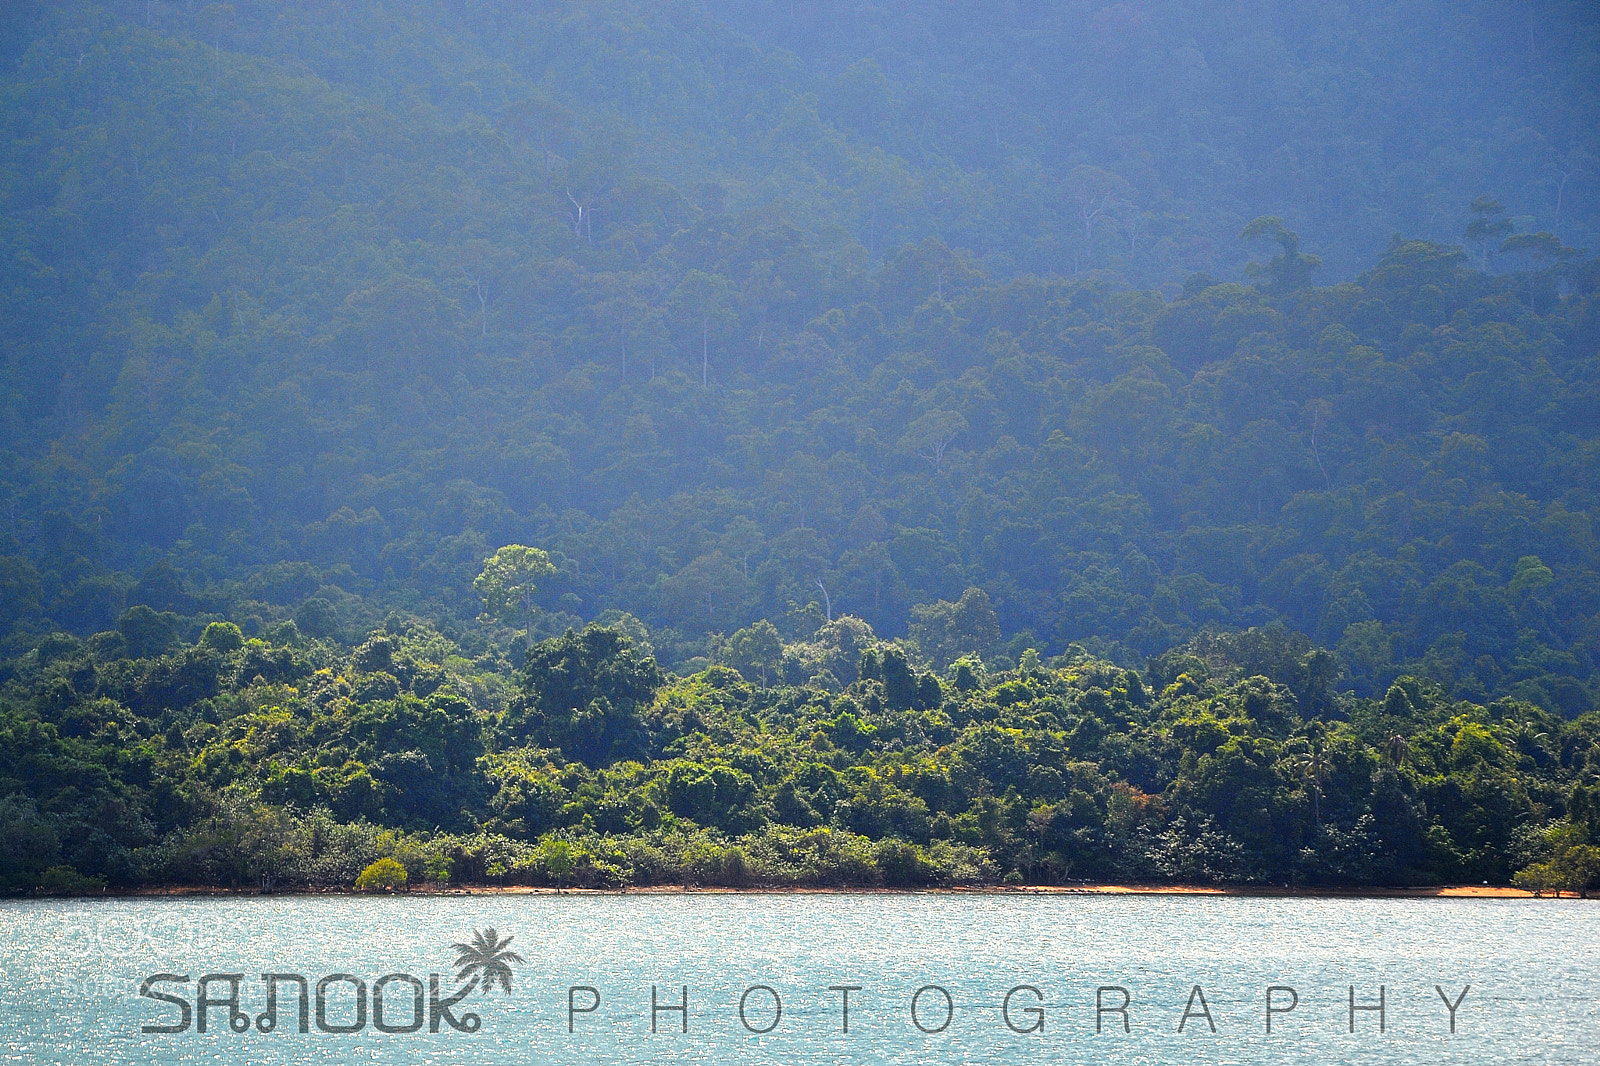 Nikon D3100 sample photo. Koh chand wild forest photography